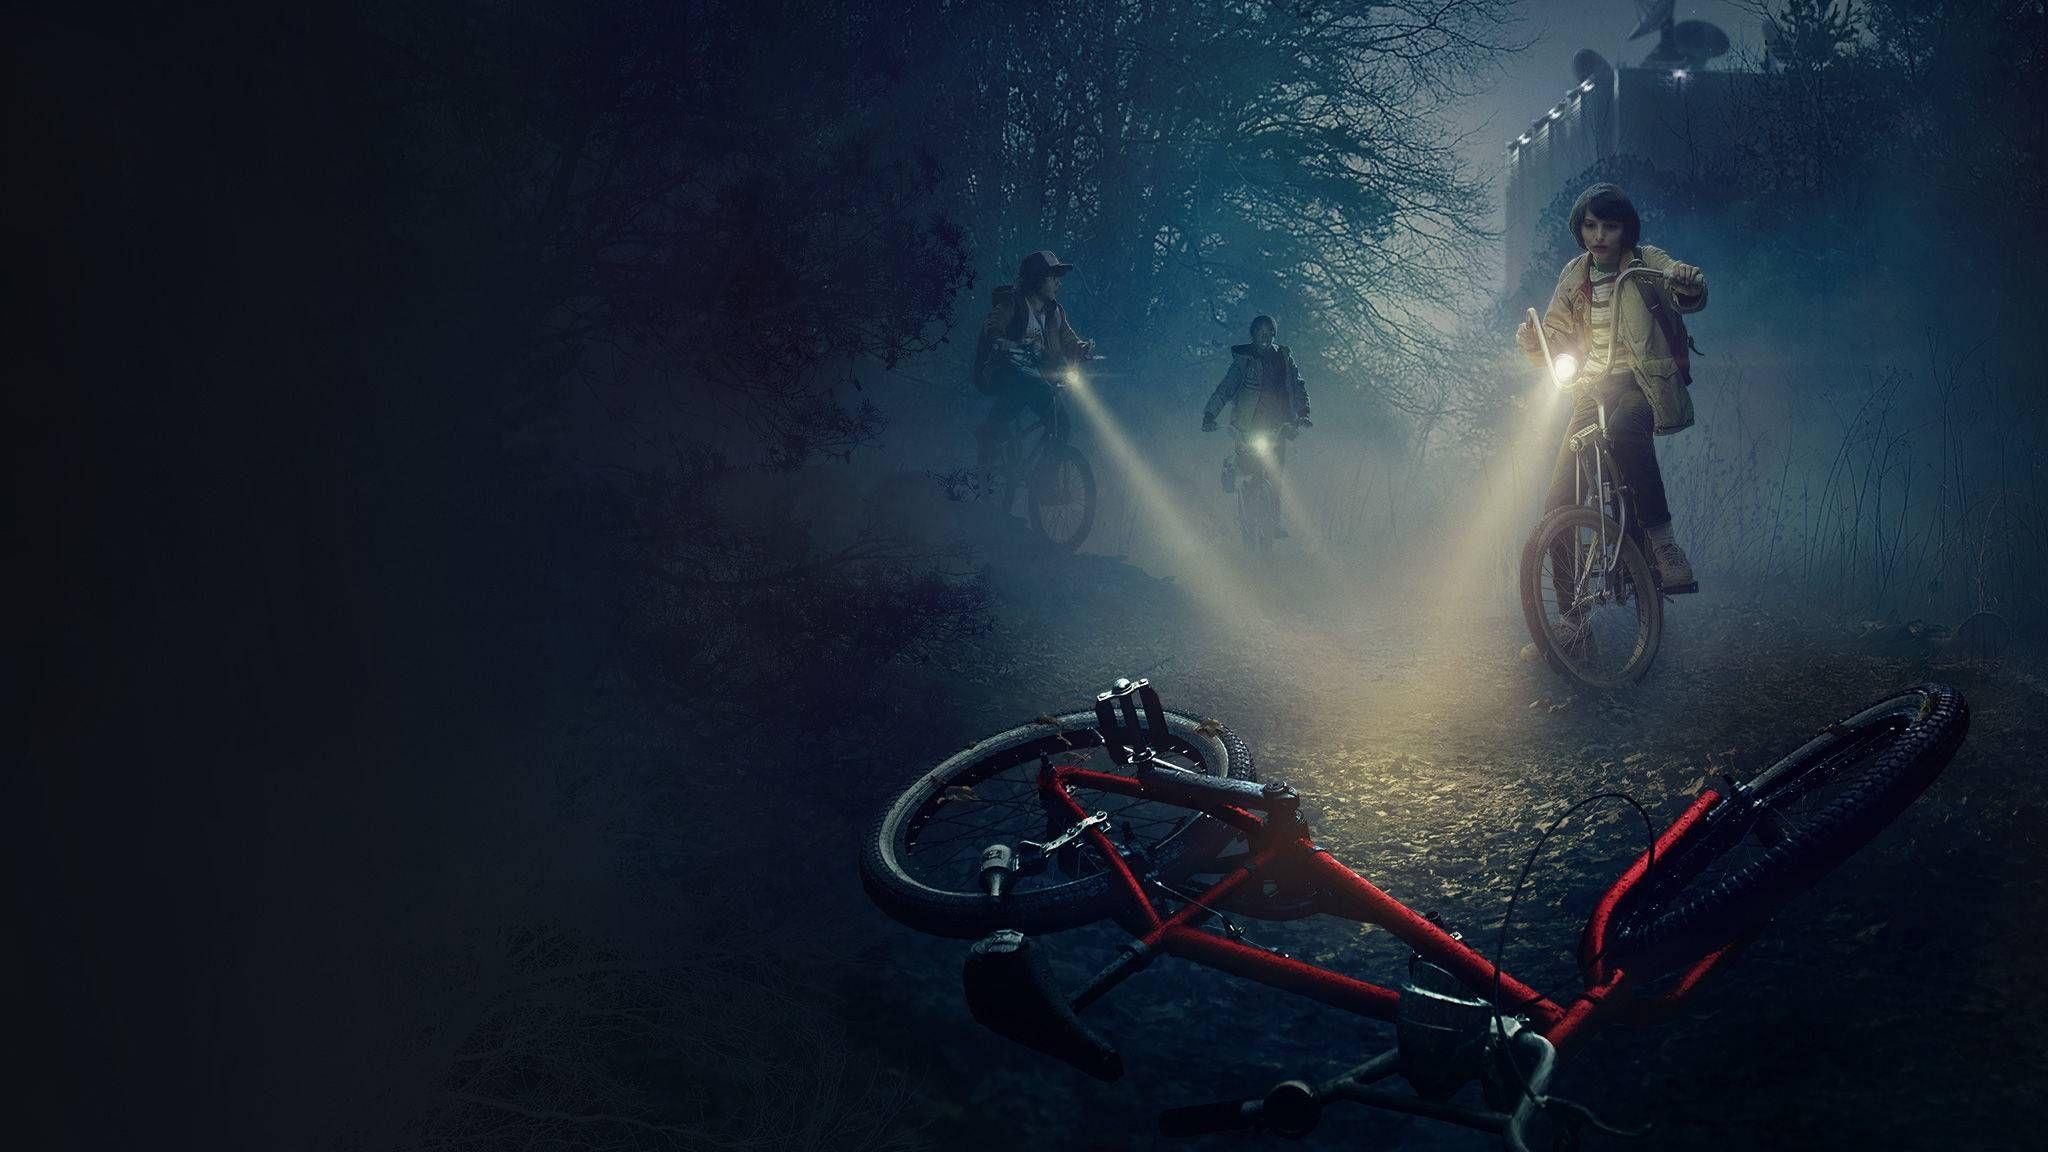 Stranger Things Season 4 Volume 2 Wallpaper HD TV Series 4K Wallpapers  Images and Background  Wallpapers Den